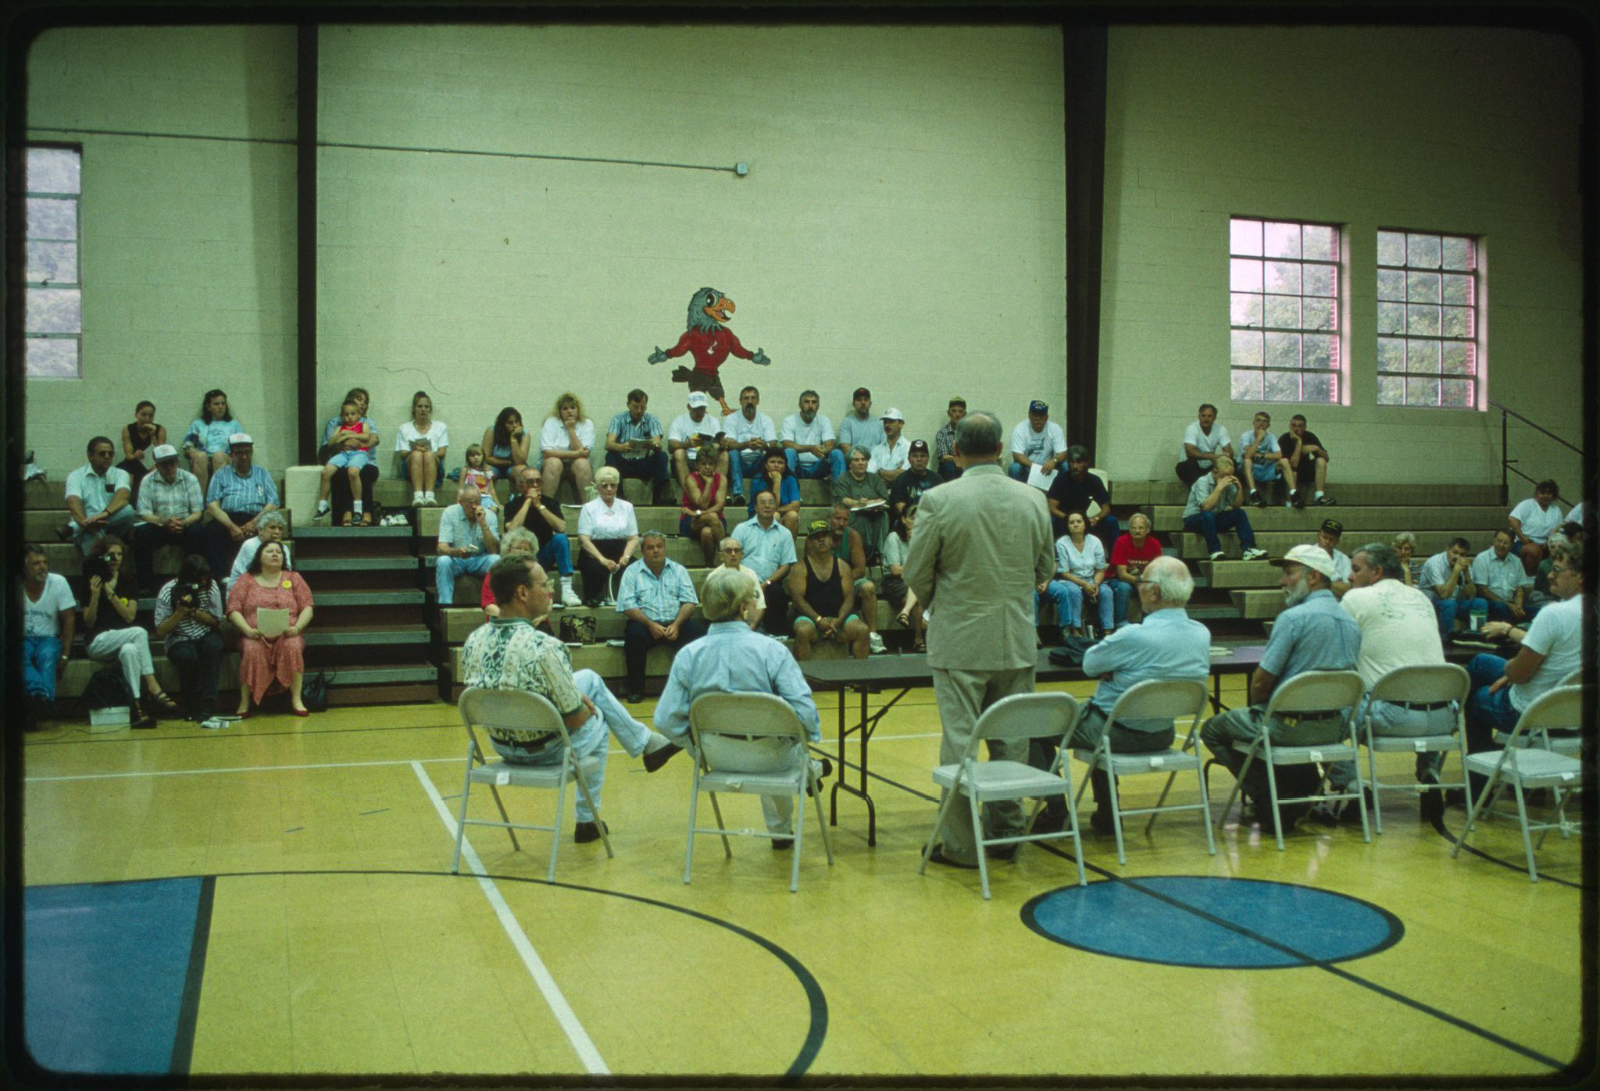 Small group of people on folding chairs addressing a crowd sitting in the bleachers of a school gymnasium